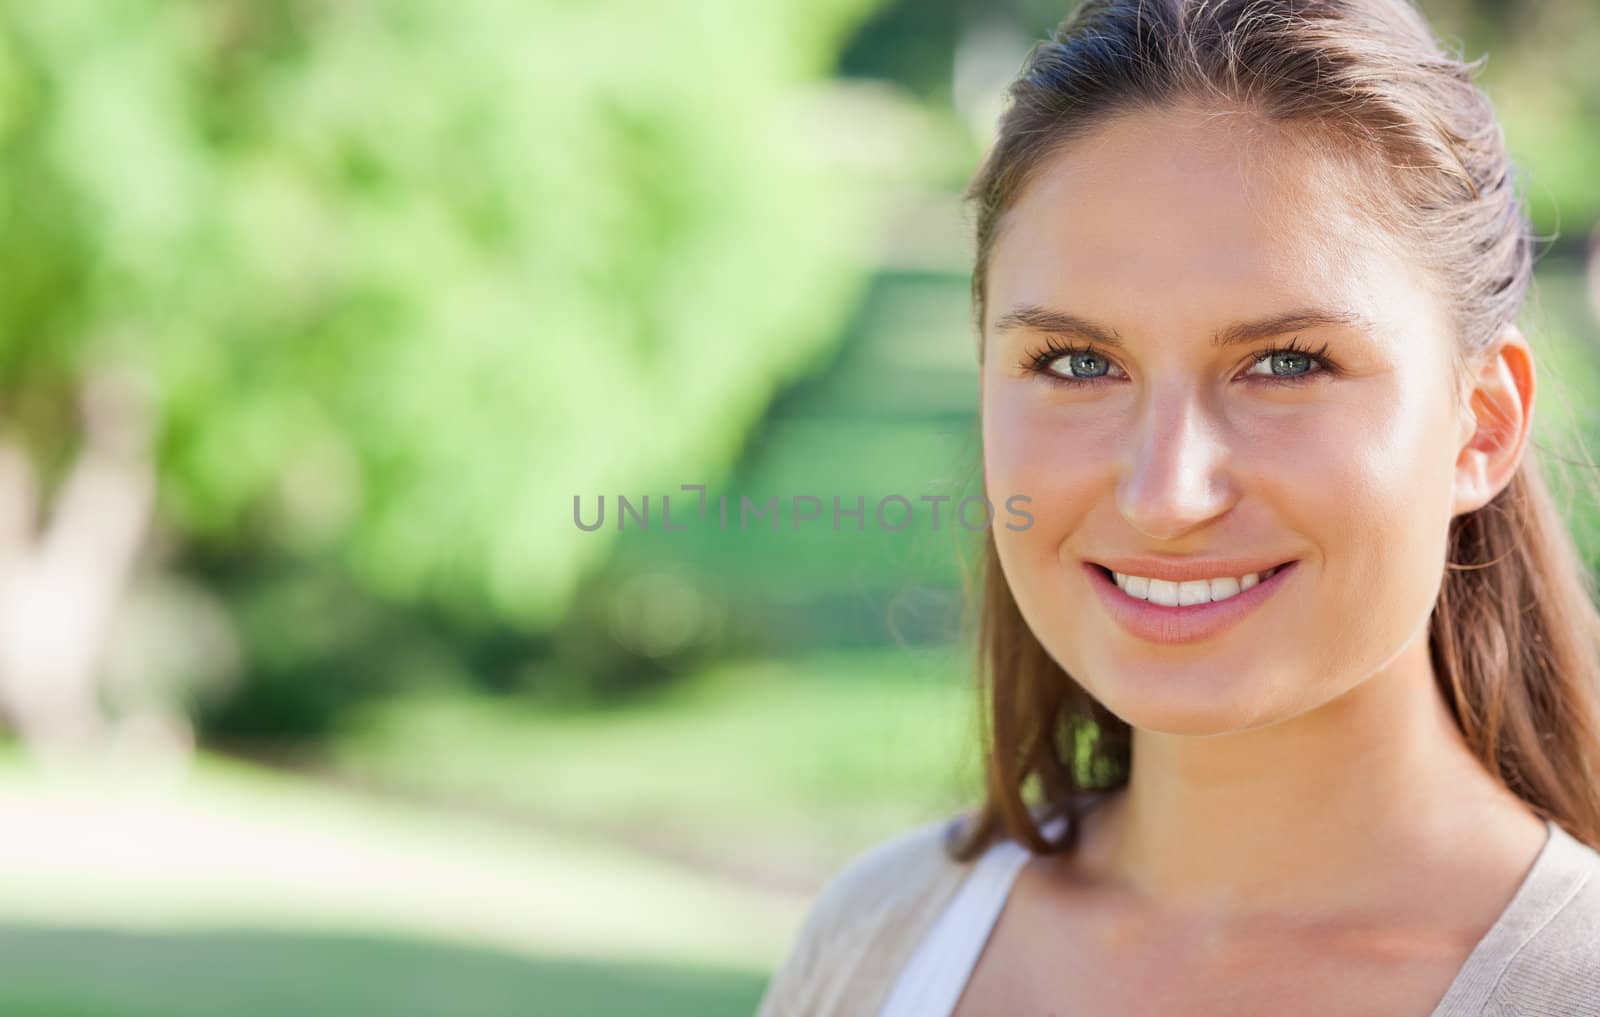 Smiling young woman spending her day in the park